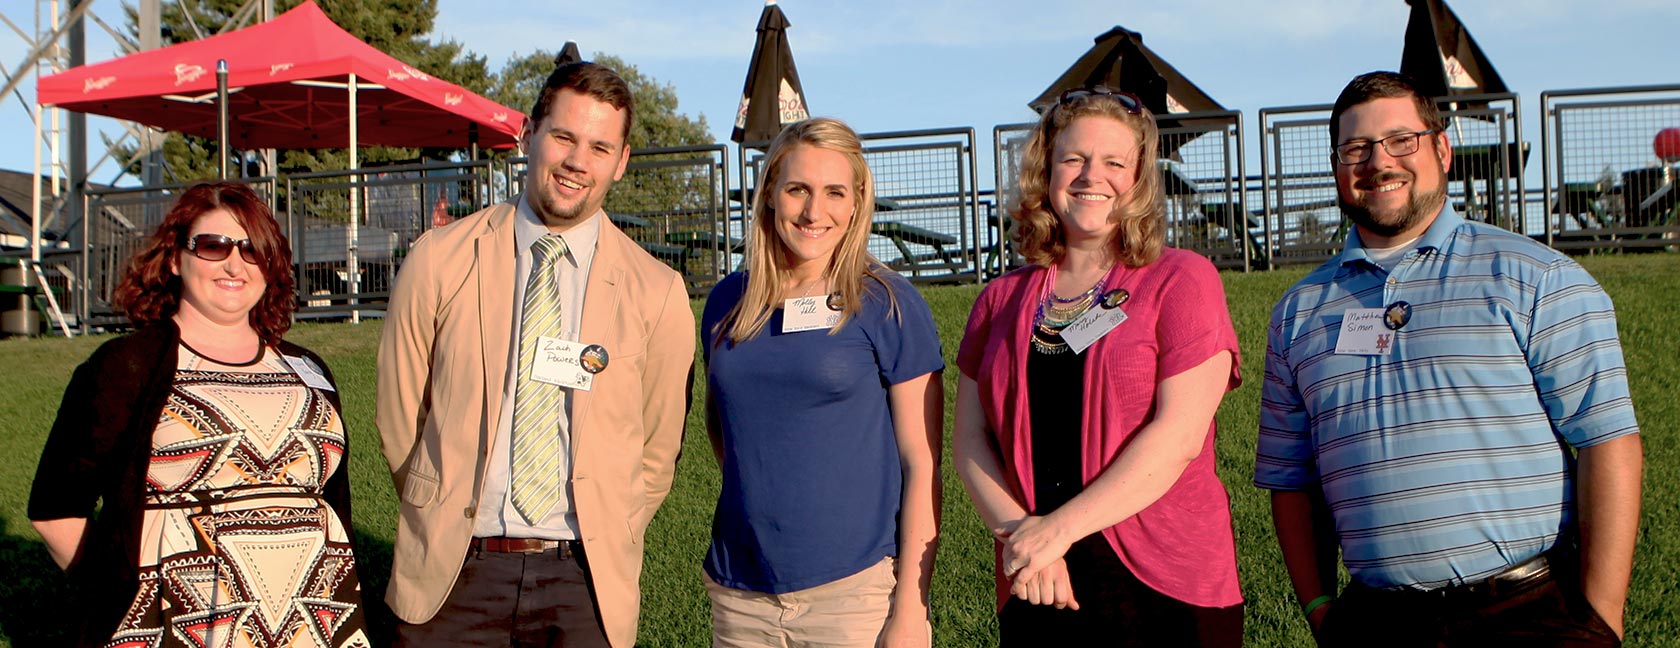 The five Lutes honored on the Business Examiner's '40 Under 40' list, from left: Rachel Young '06, '13; Zach Powers '10; , Molly Hill '05; Mary Holste '00; and Matthew Simon '03. (Photo: Holly Powers)